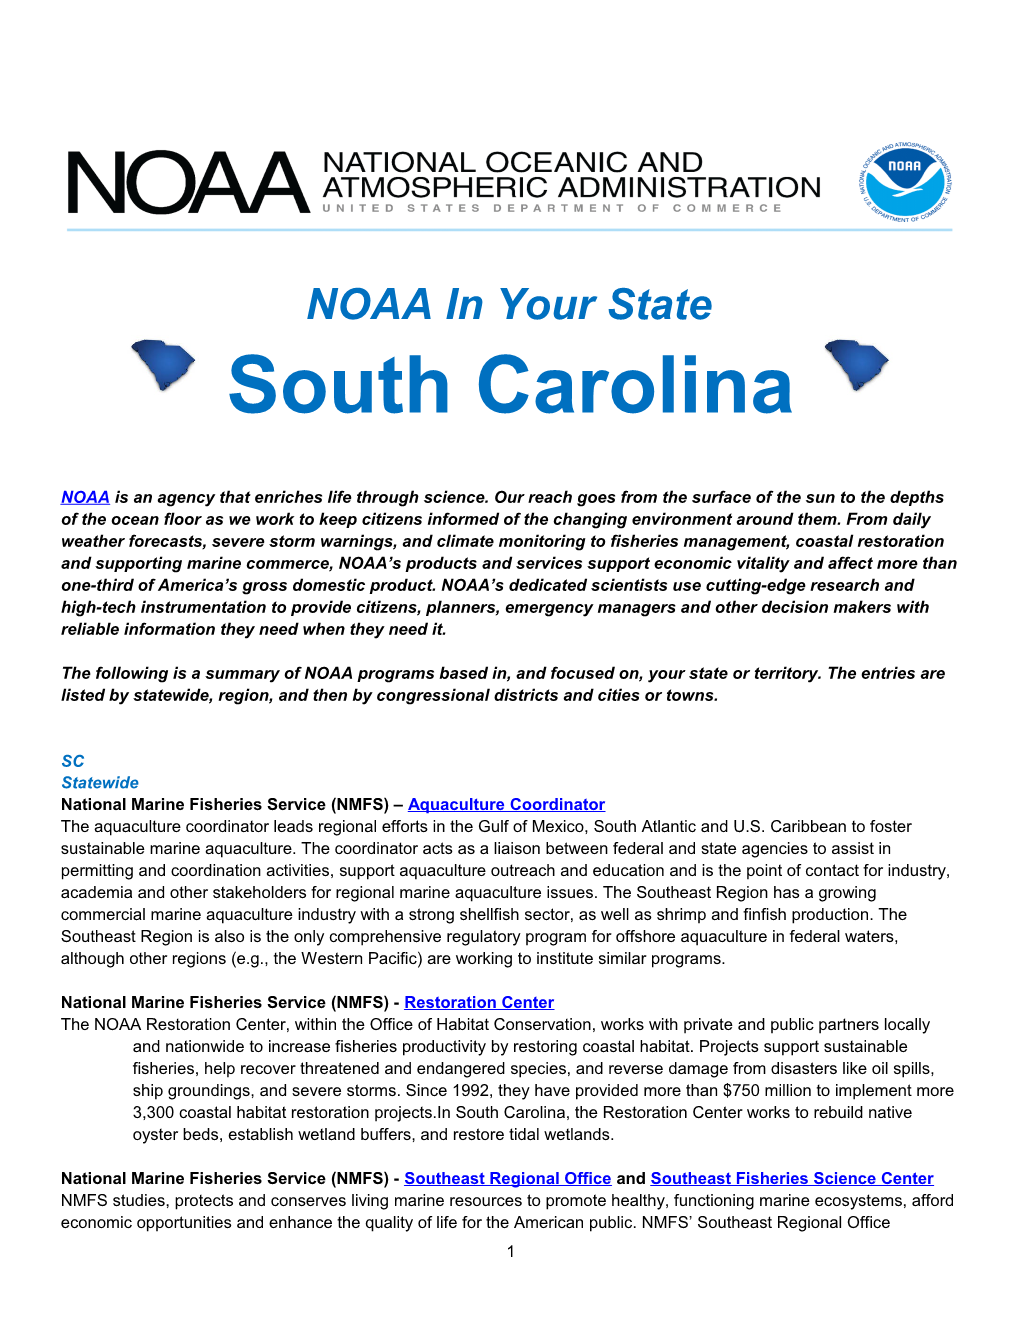 NOAA in Your State - South Carolina